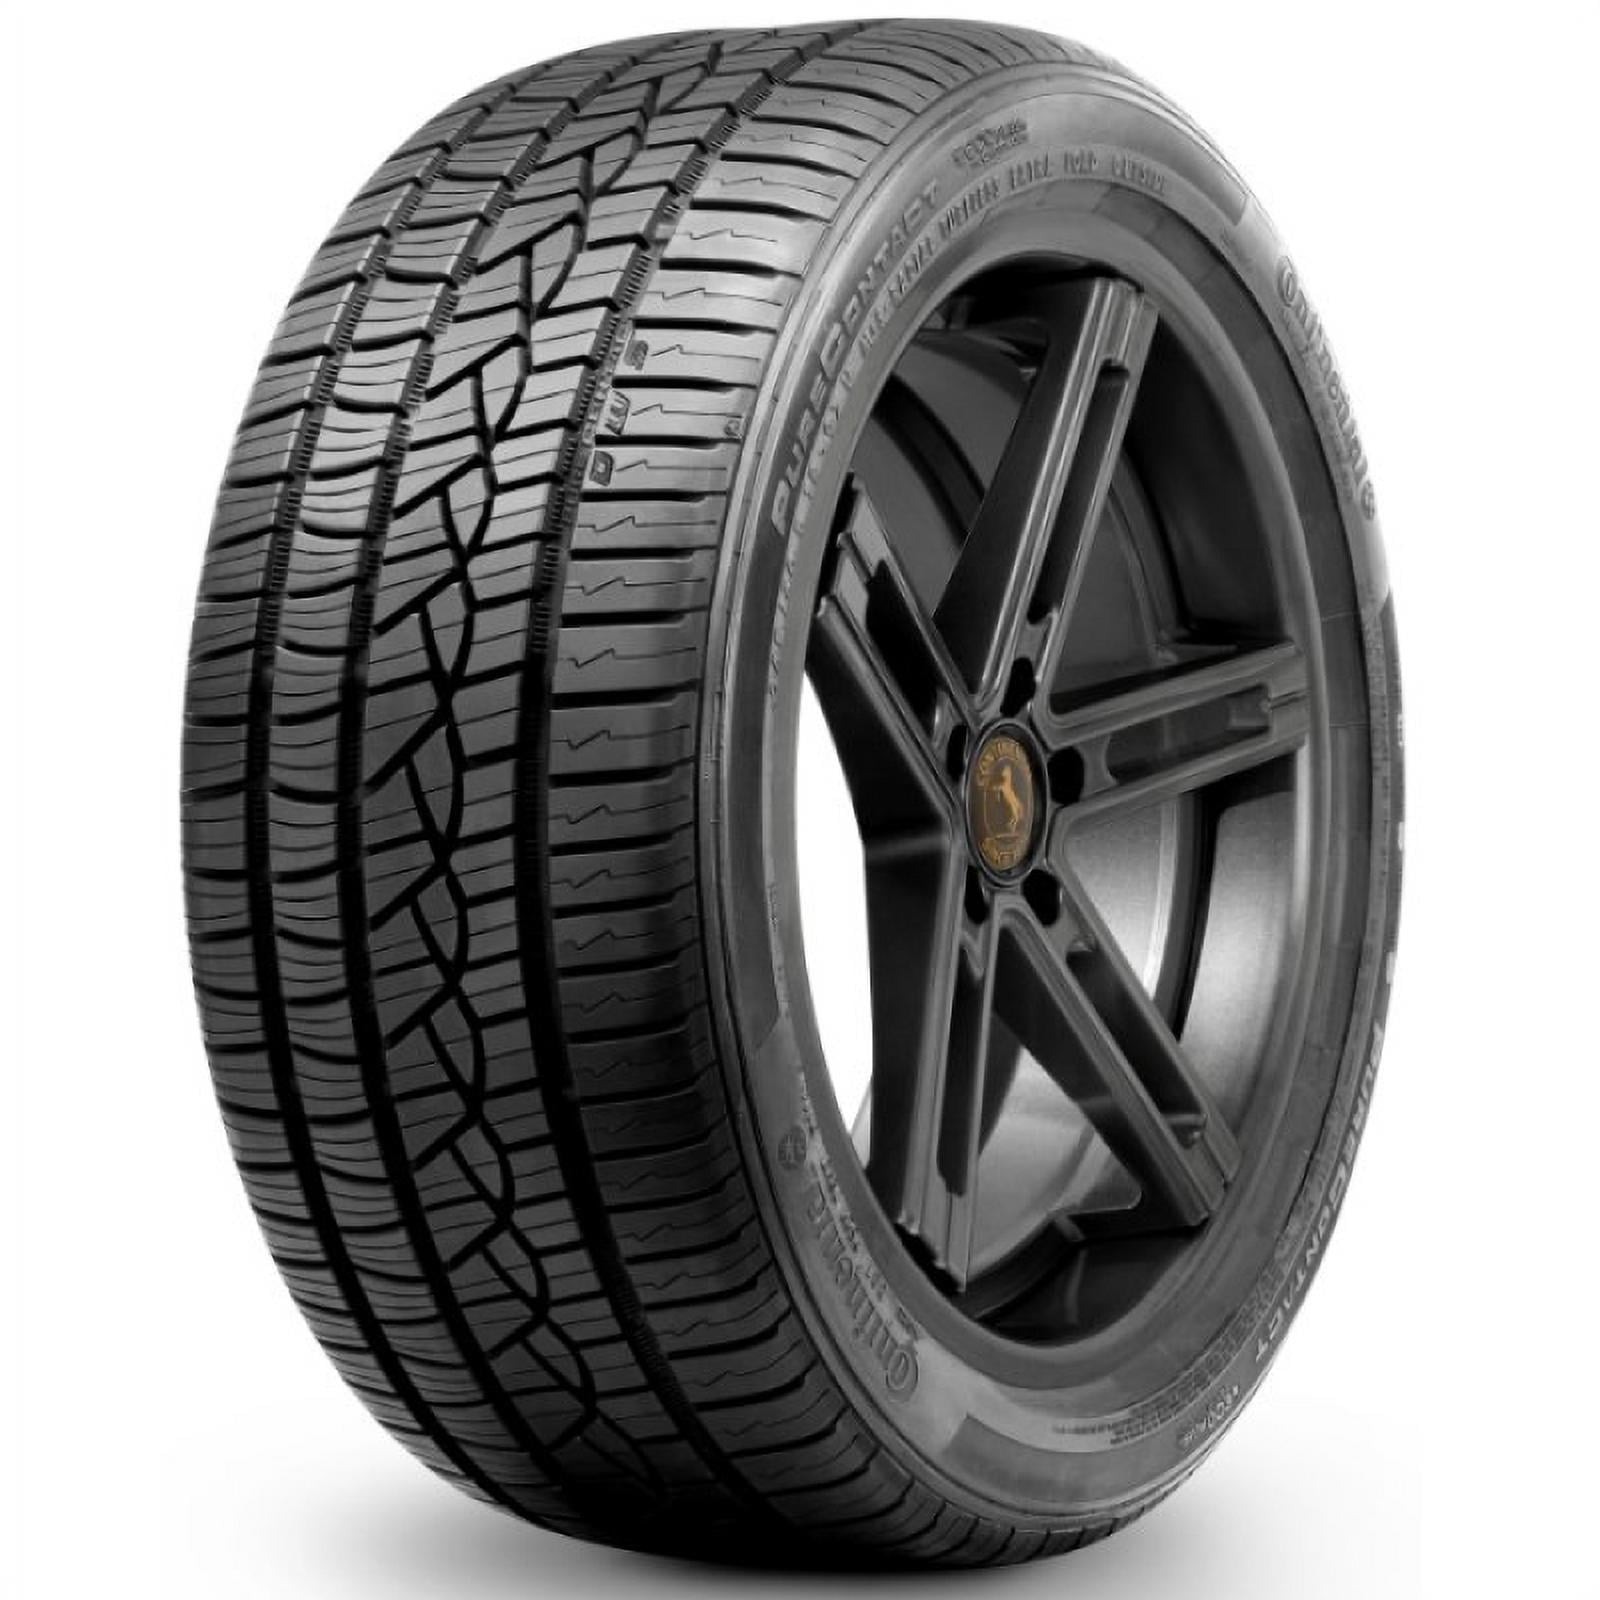 CONTINENTAL PureContact LS All-Season Radial Tire-245/50R17 99V 